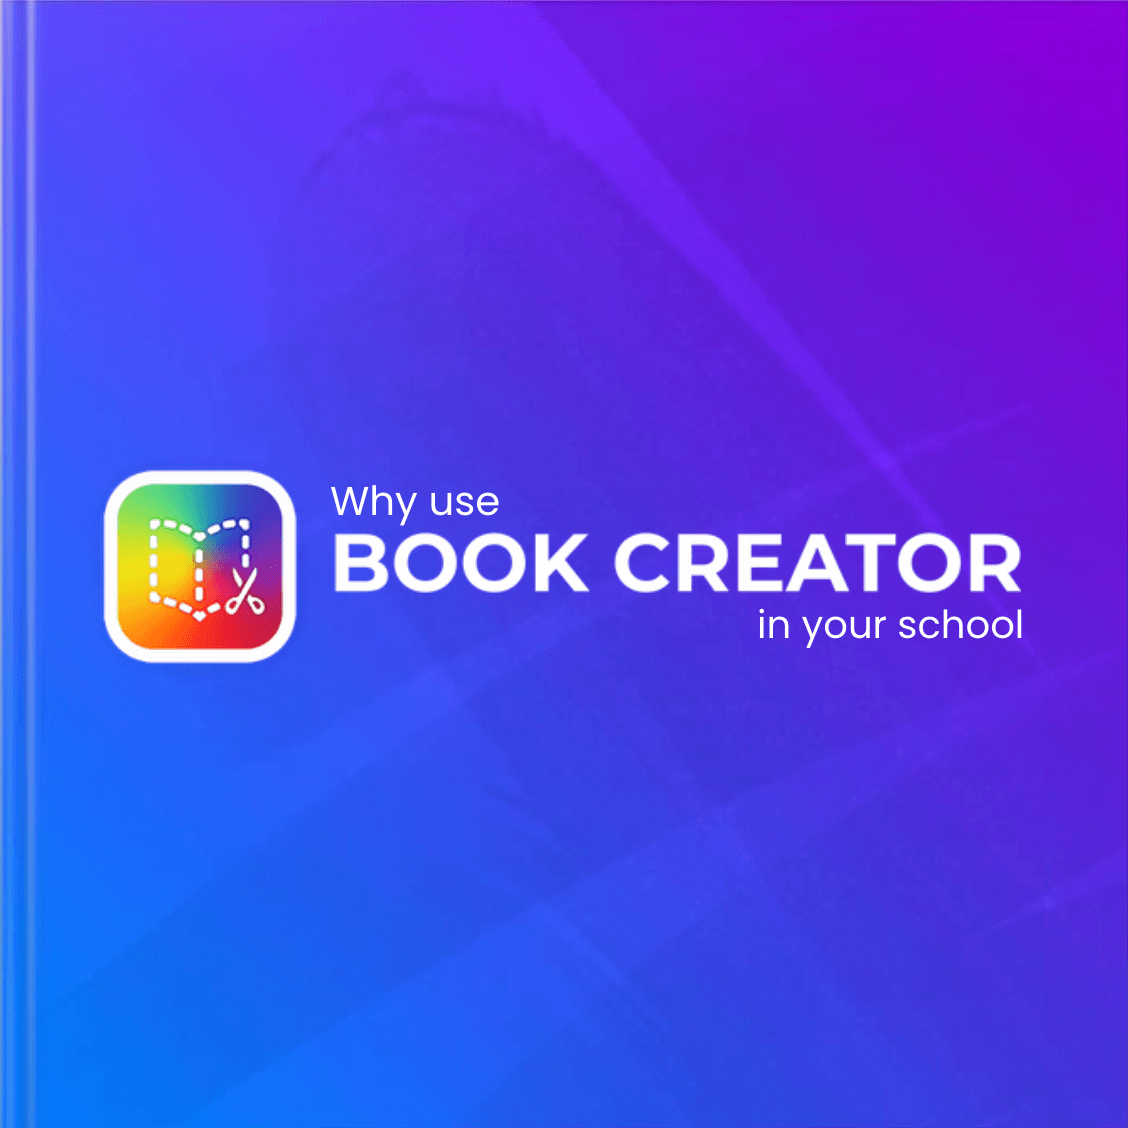 Why use Book Creator in your school?